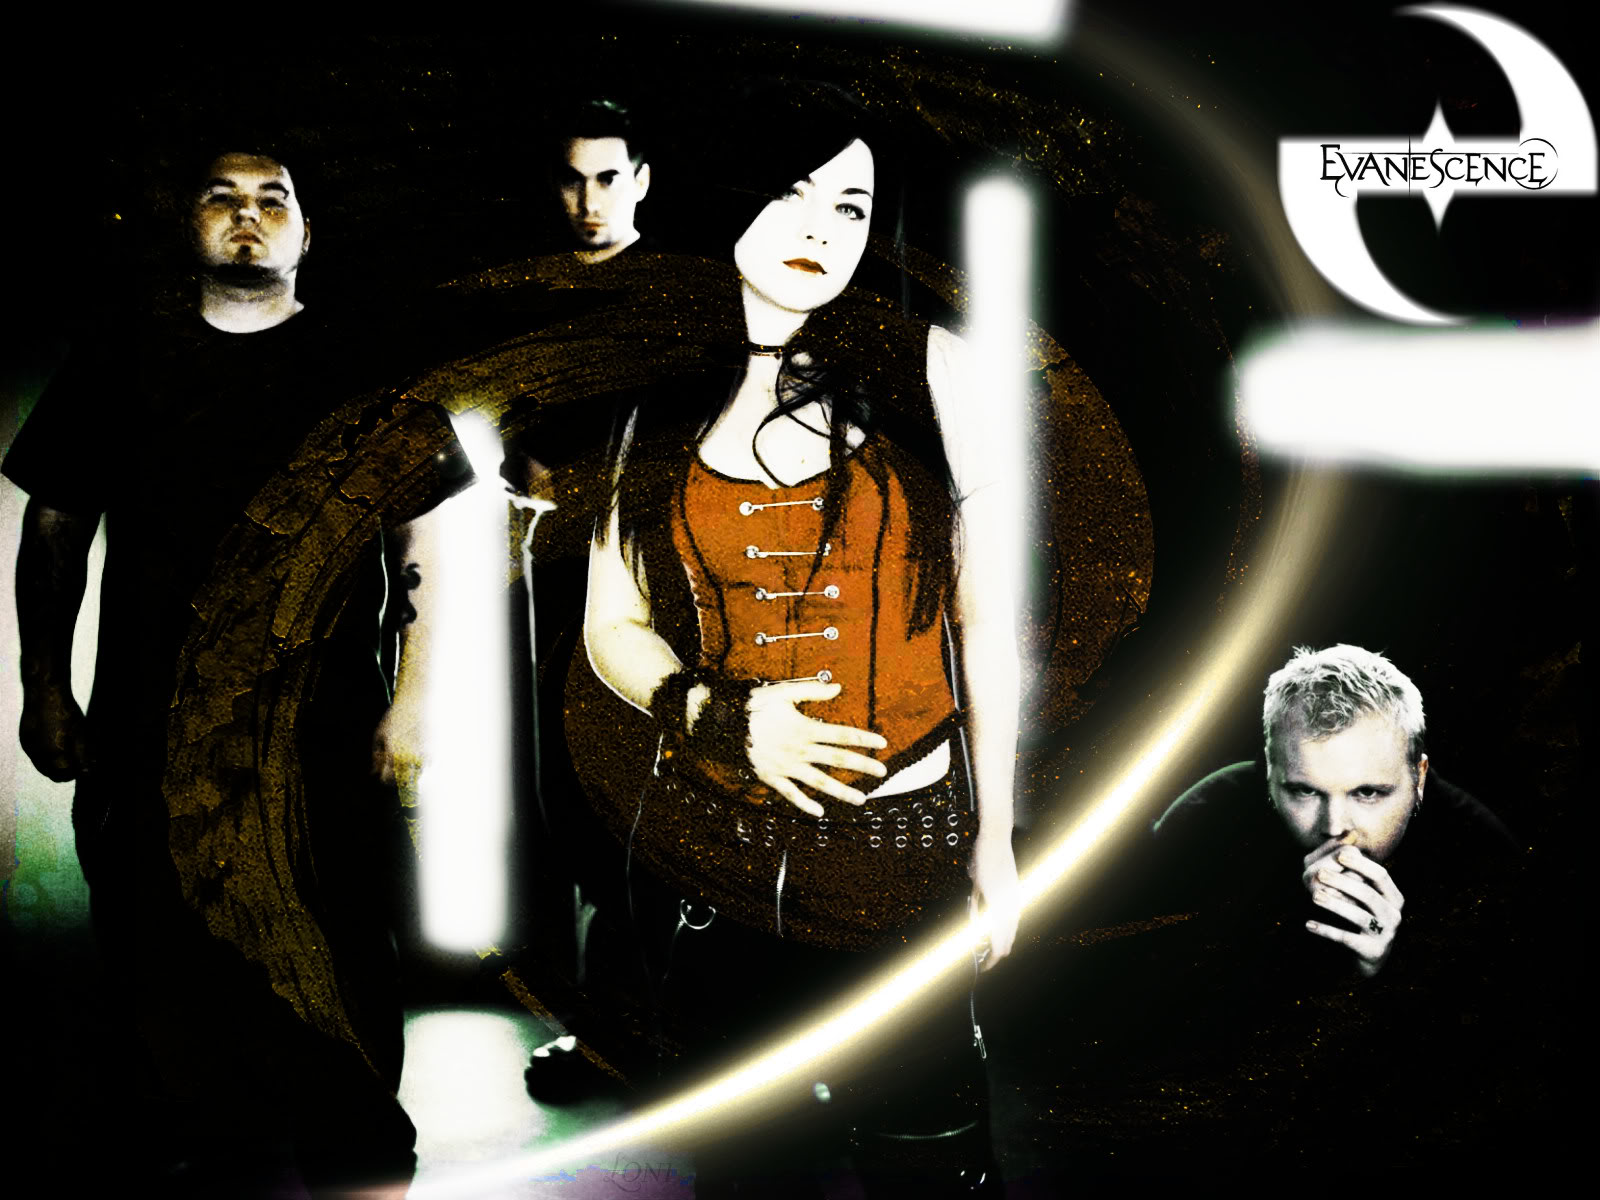 evanescence red wallpaper